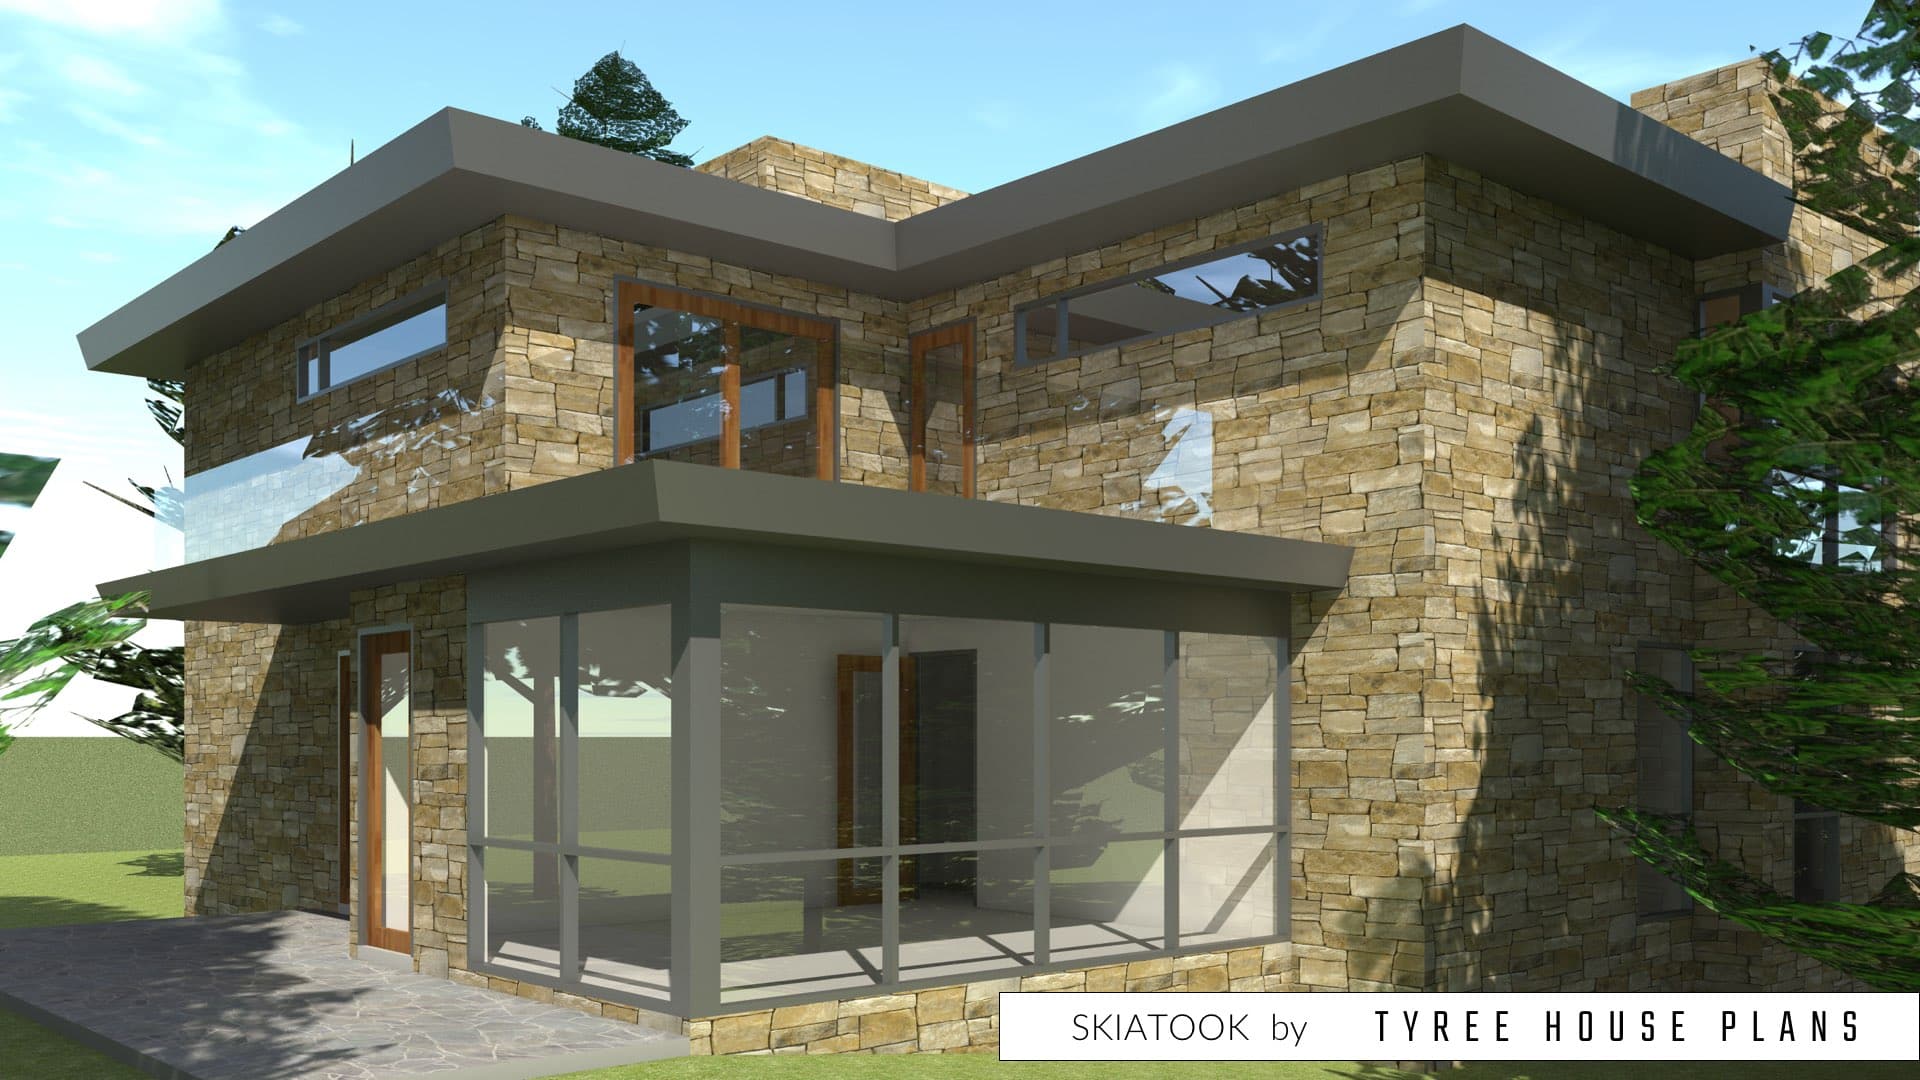 Skiatook by Tyree House Plans.